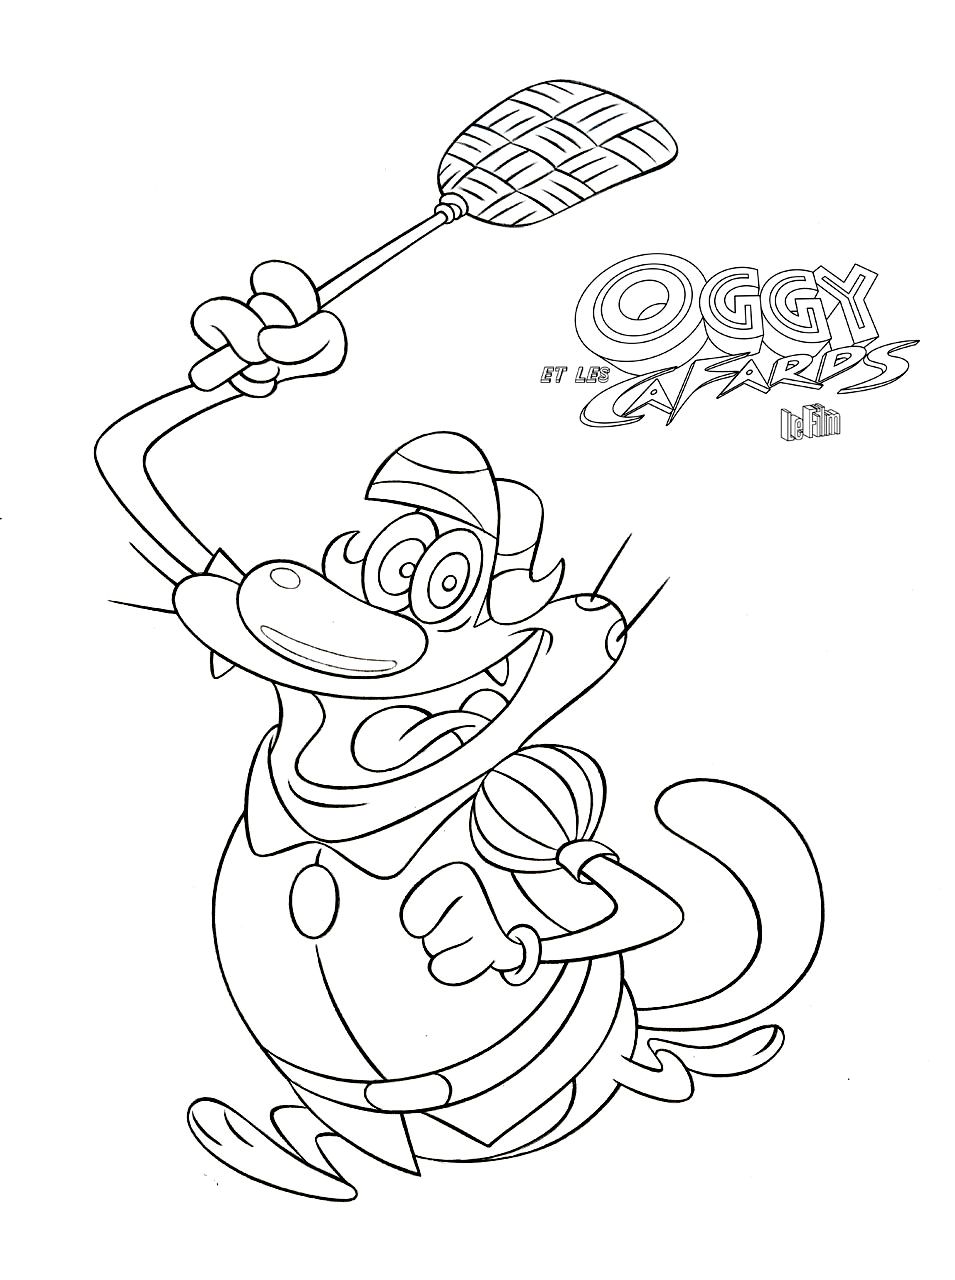 Cool Oggy And The Cockroaches 15 Coloring Page